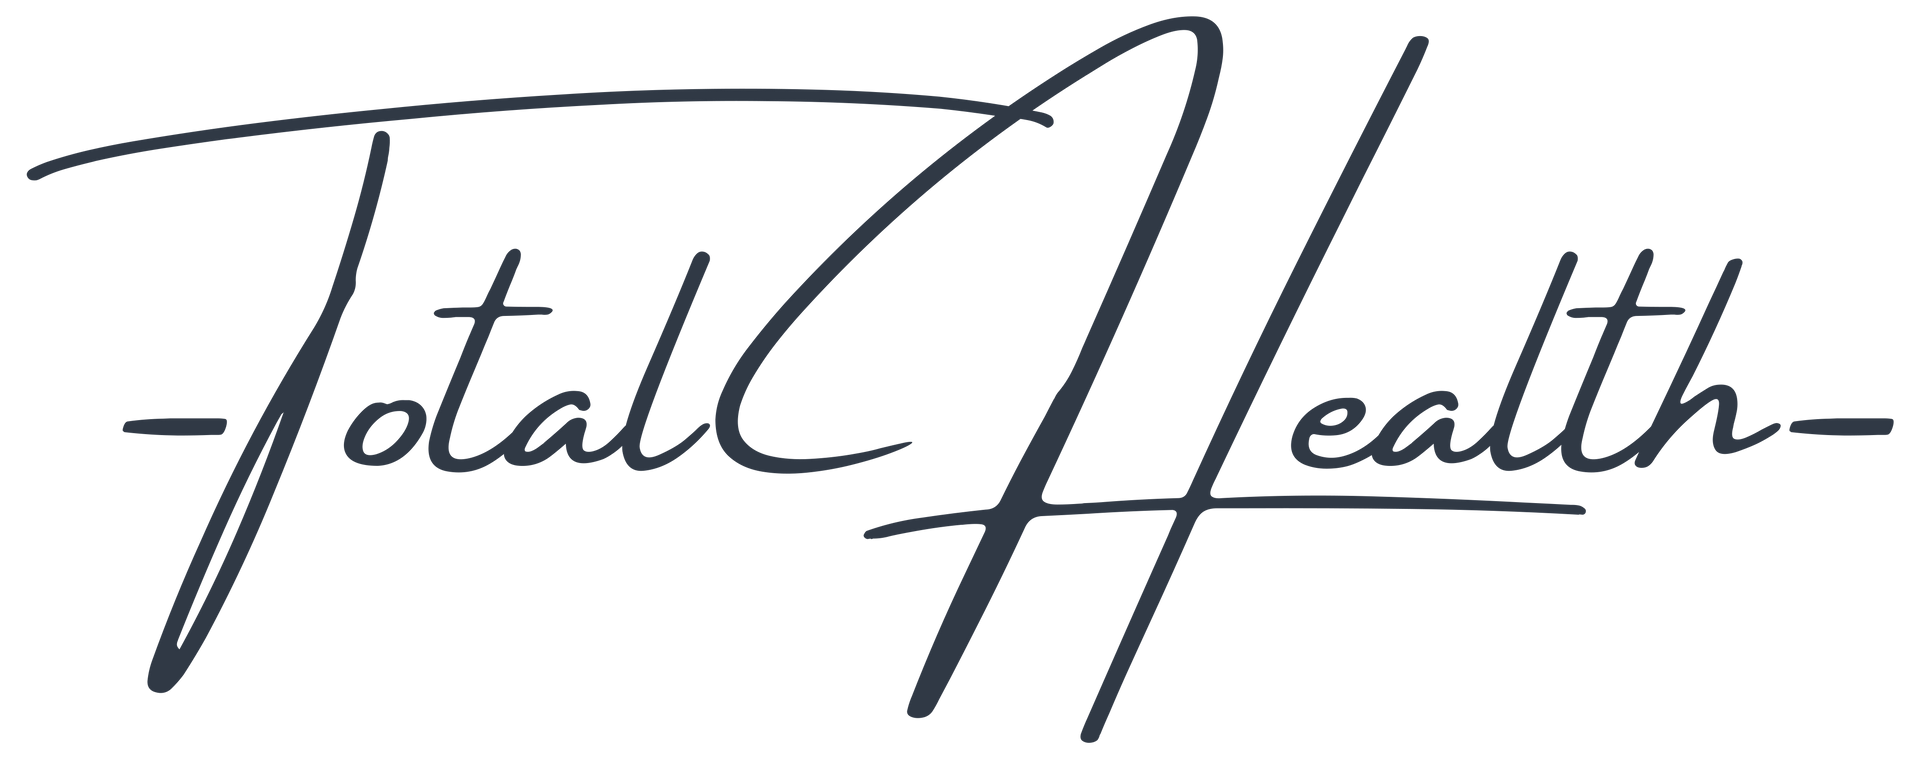 The logo for total health is written in cursive on a white background.